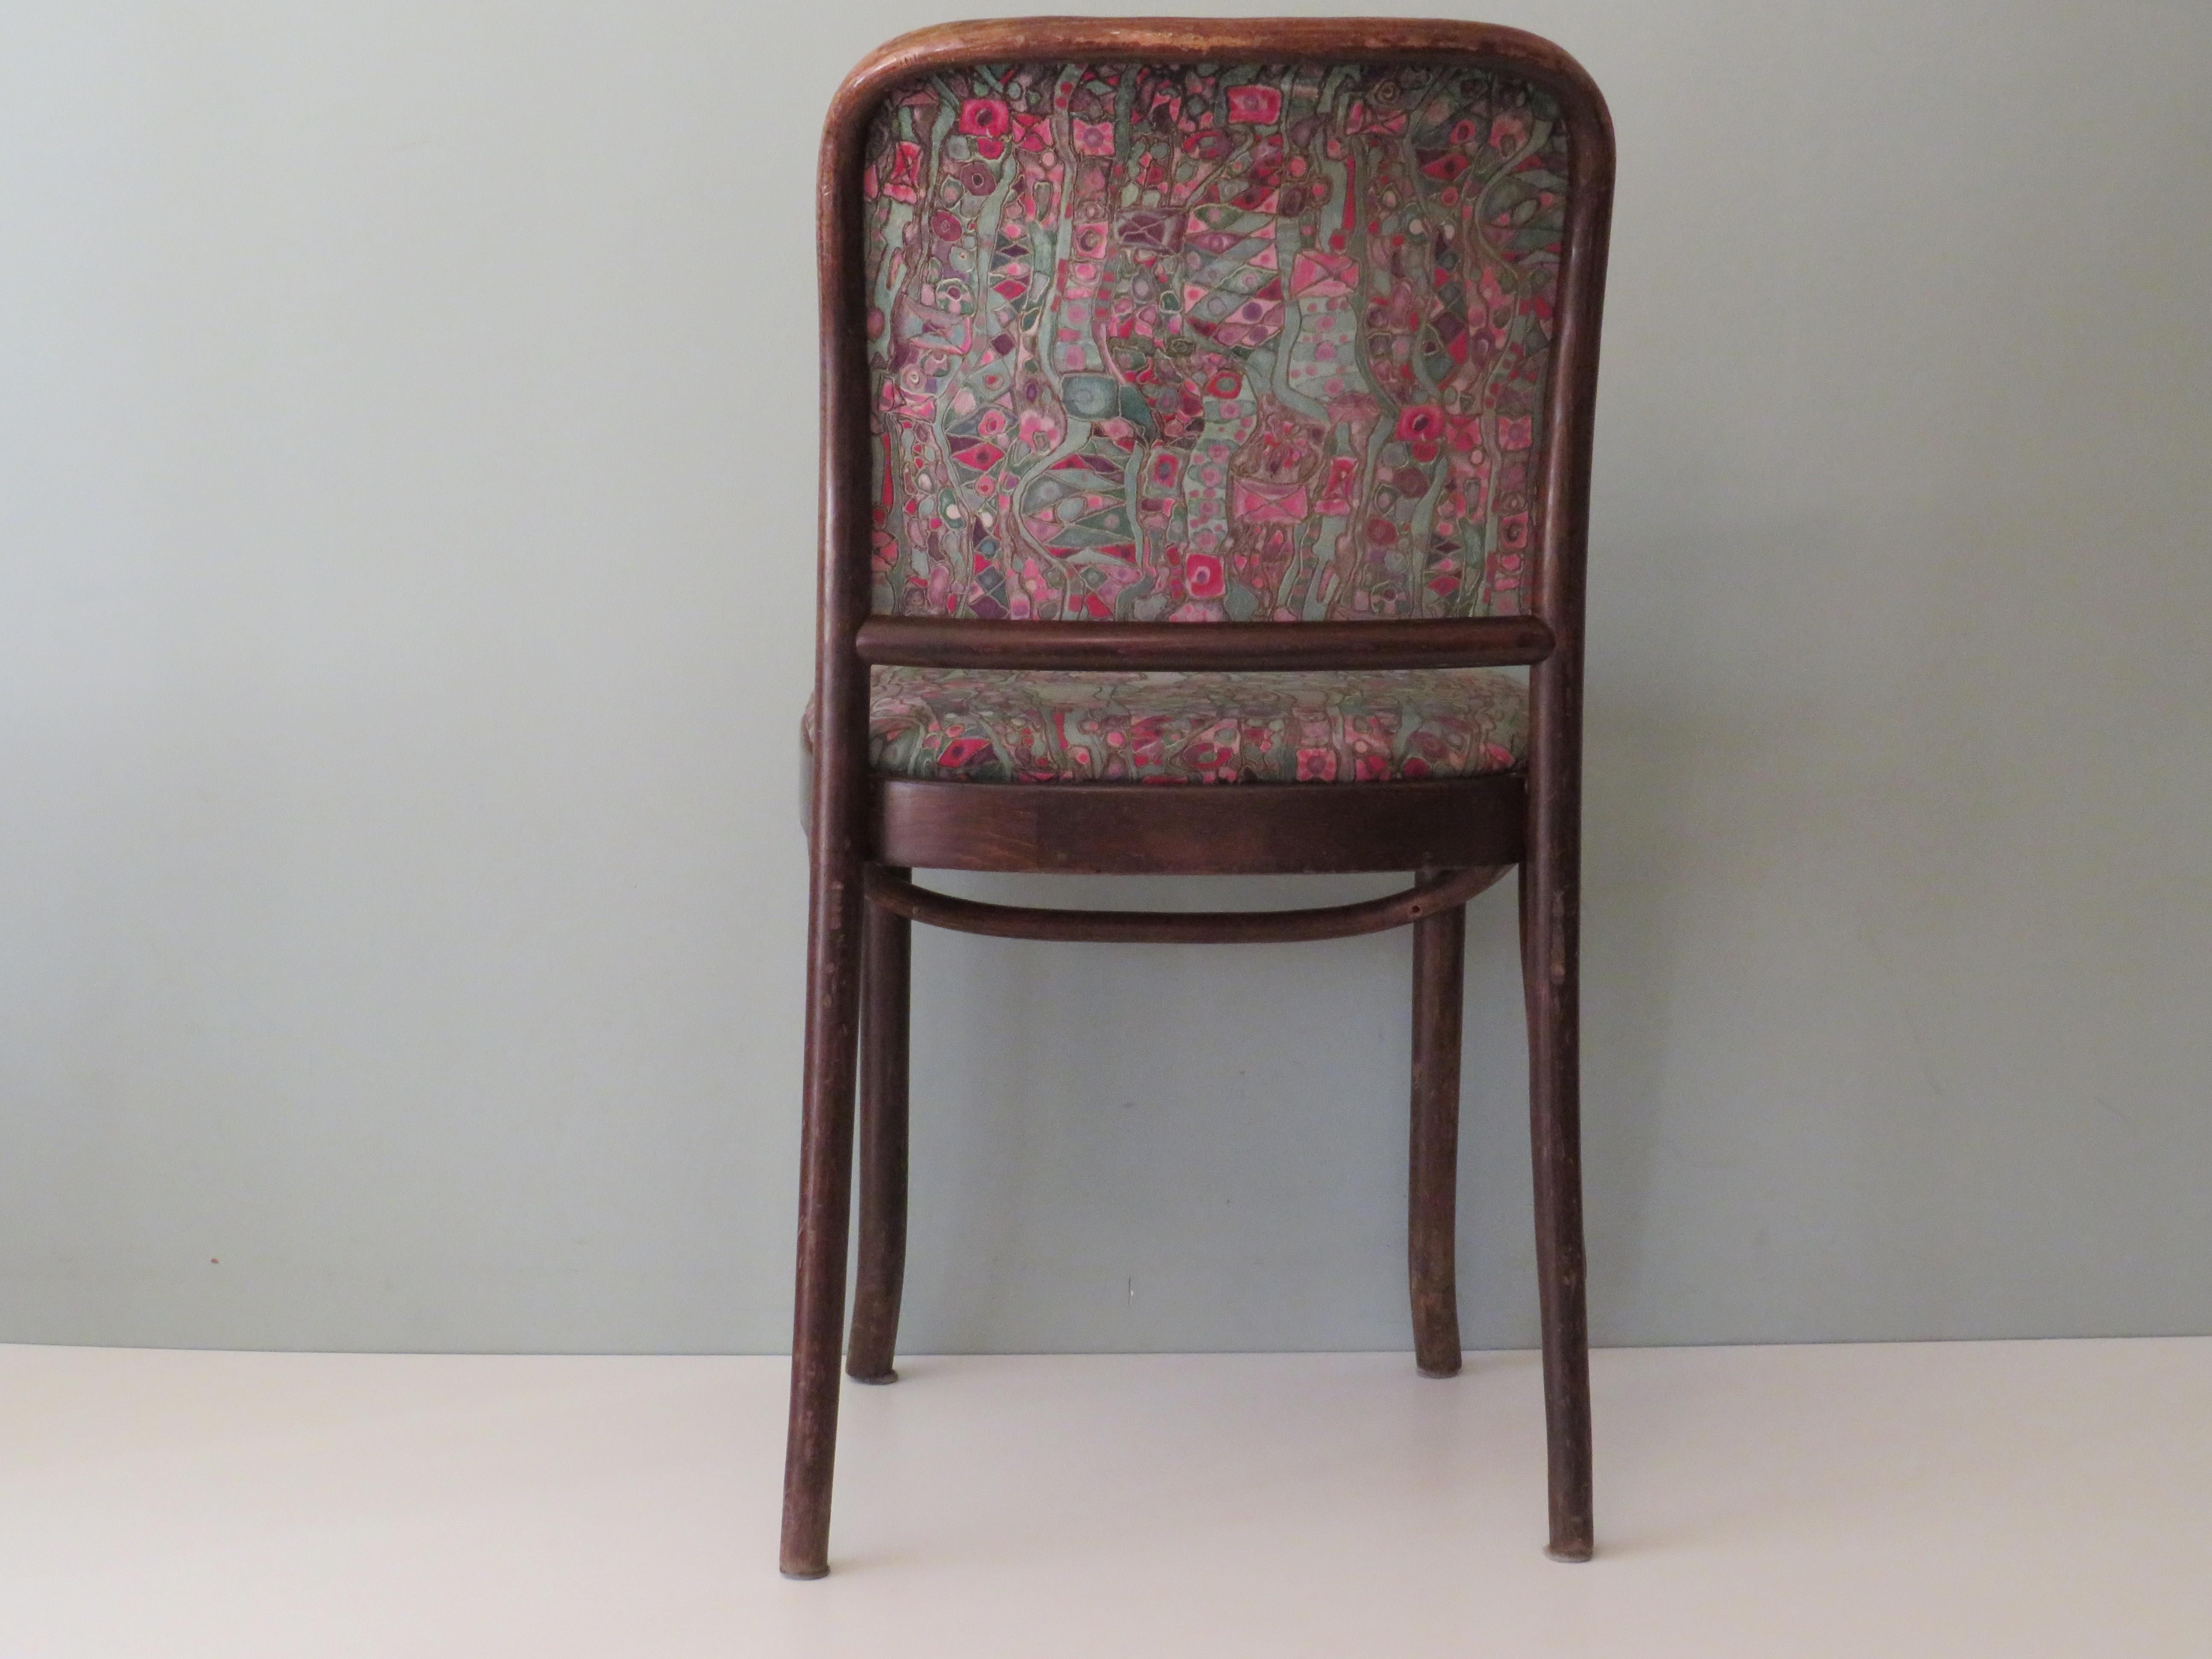 4 Thonet Chairs, Model Prague No. 811, First Half of the 20th Century For Sale 6